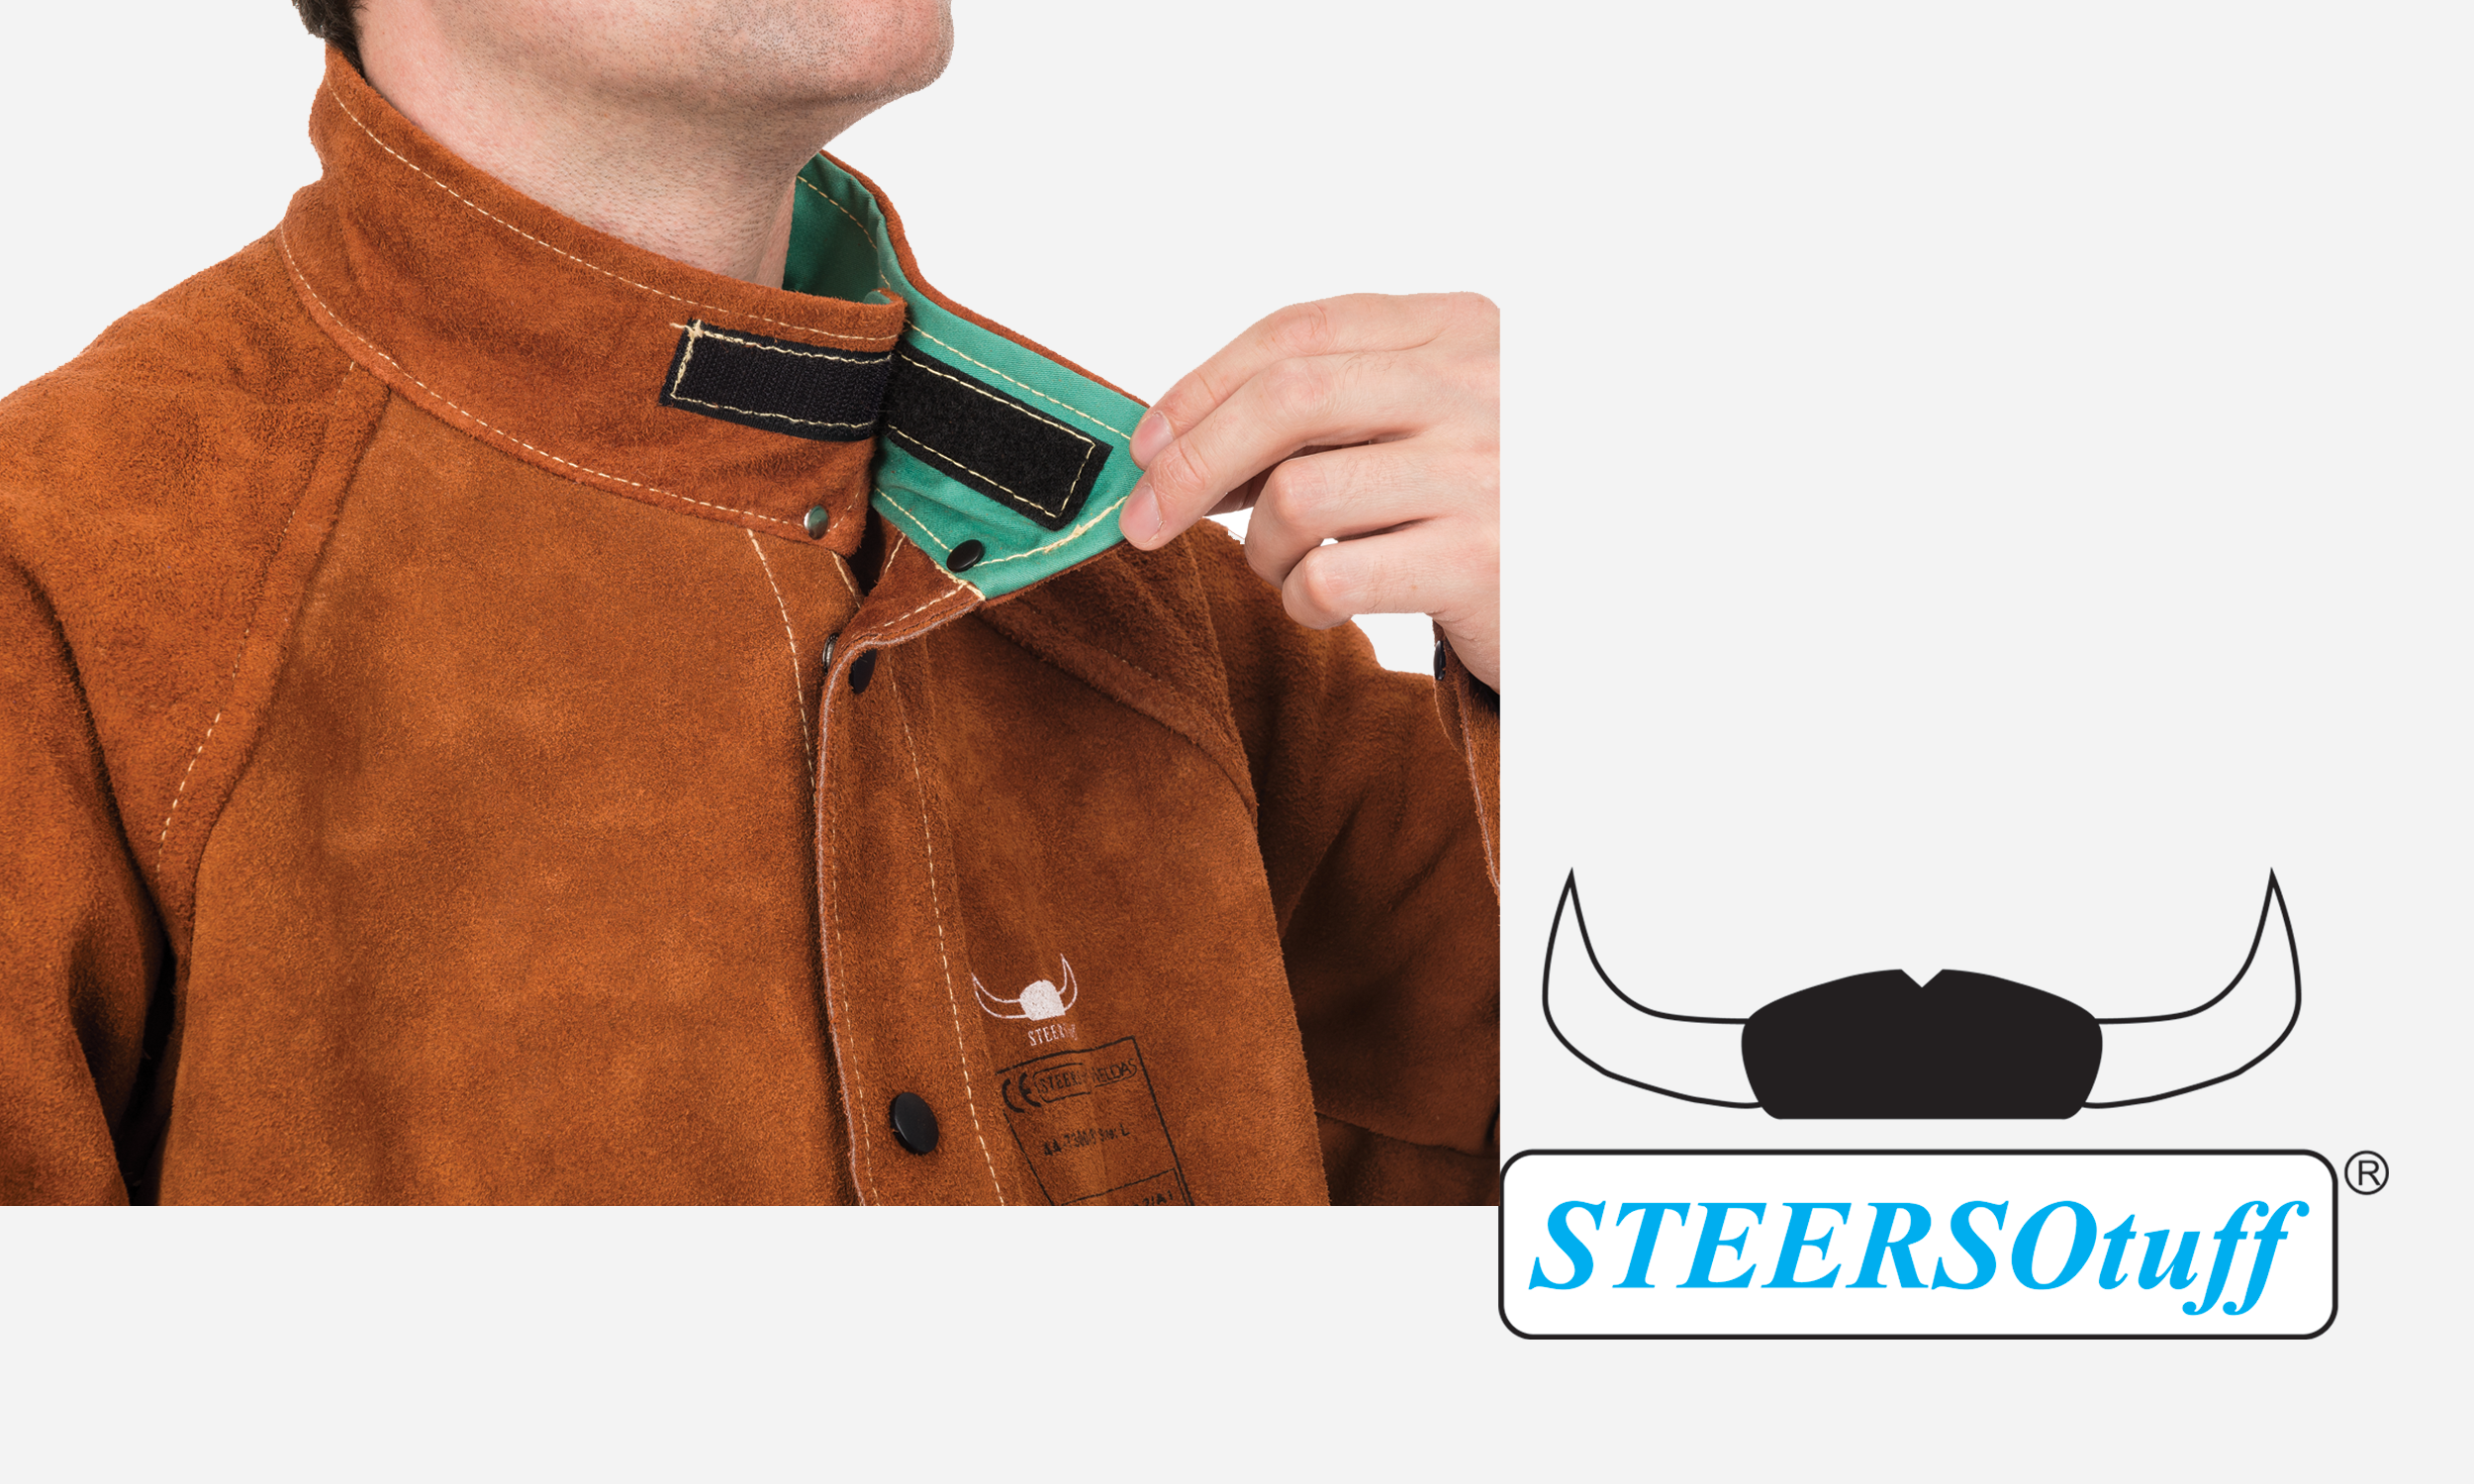 44-7800 STEERSOtuff Cape Sleeves Roll-up collar.png